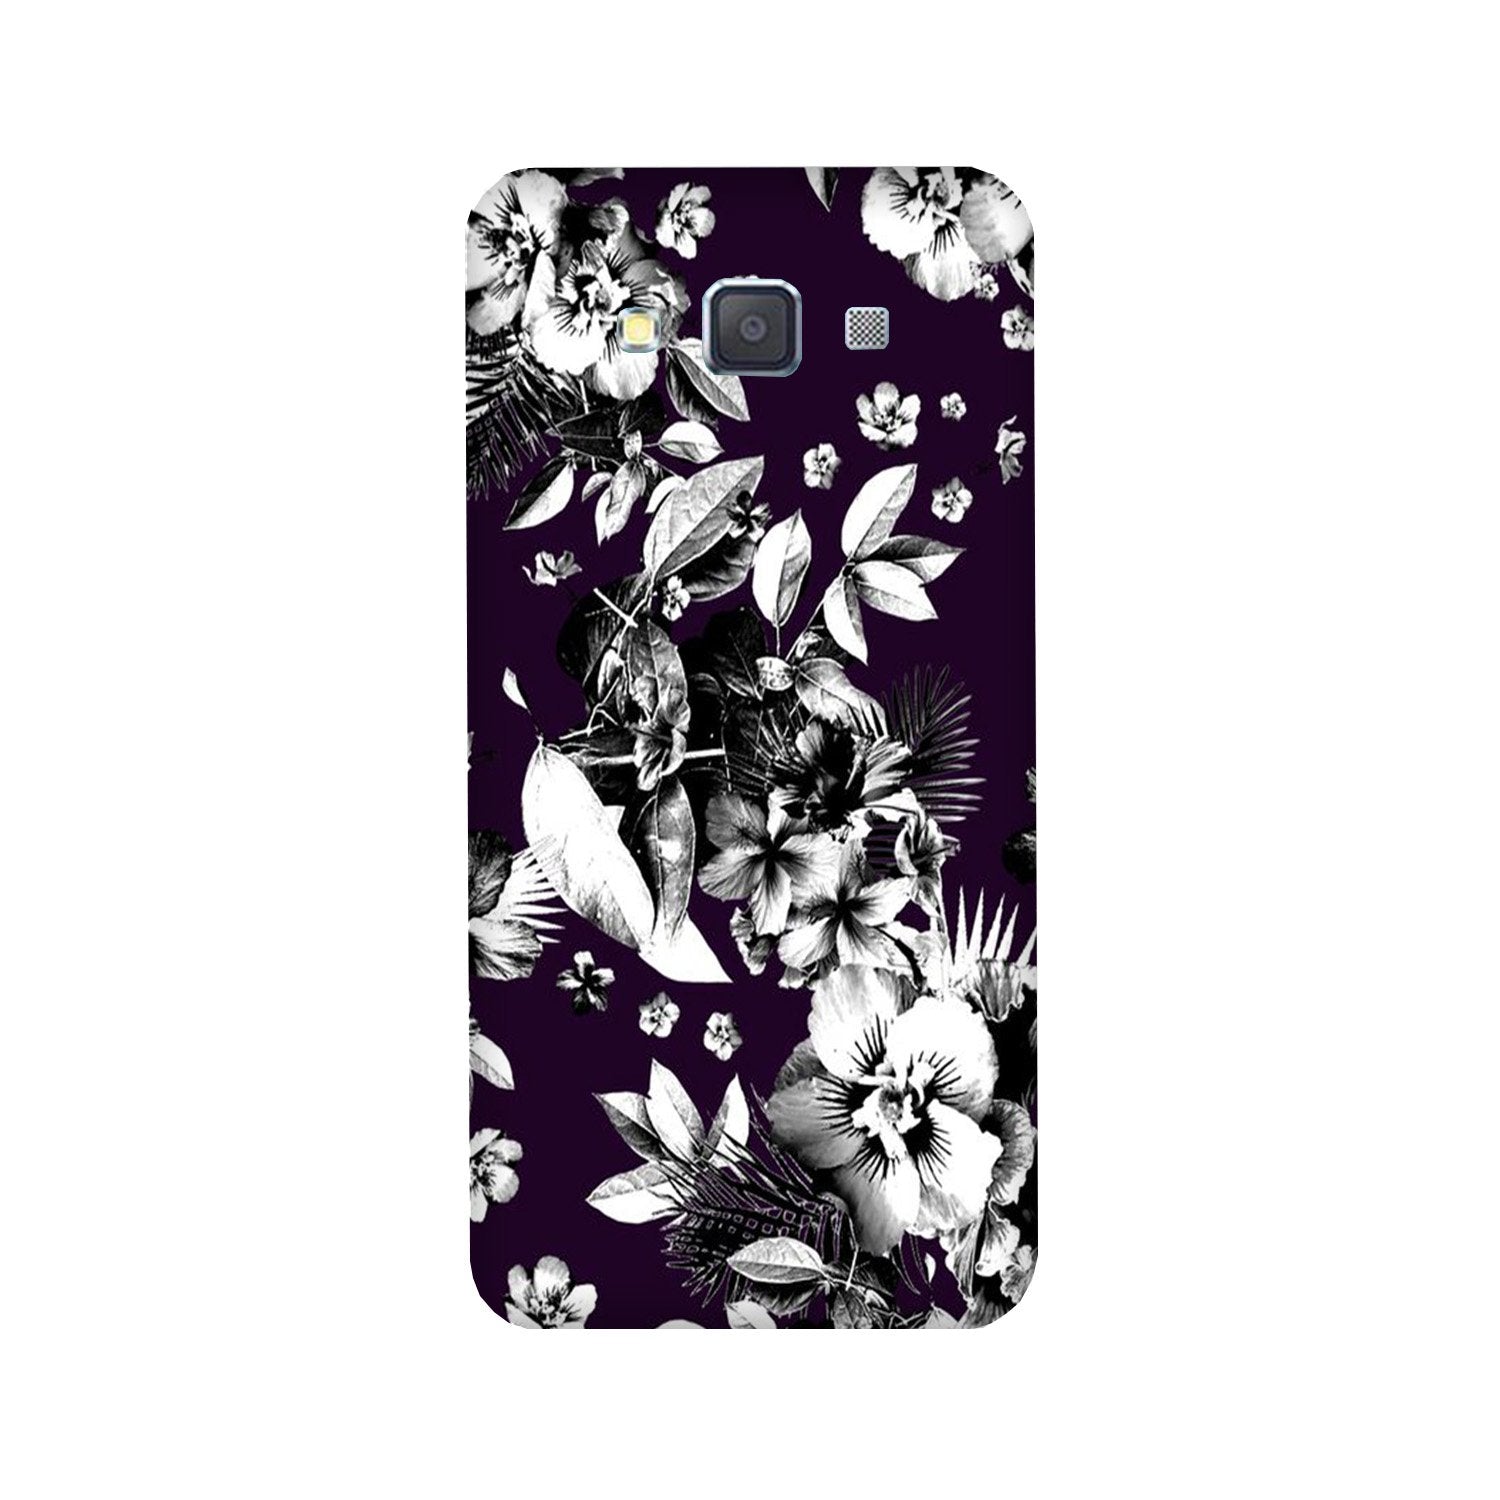 white flowers Case for Galaxy Grand Prime